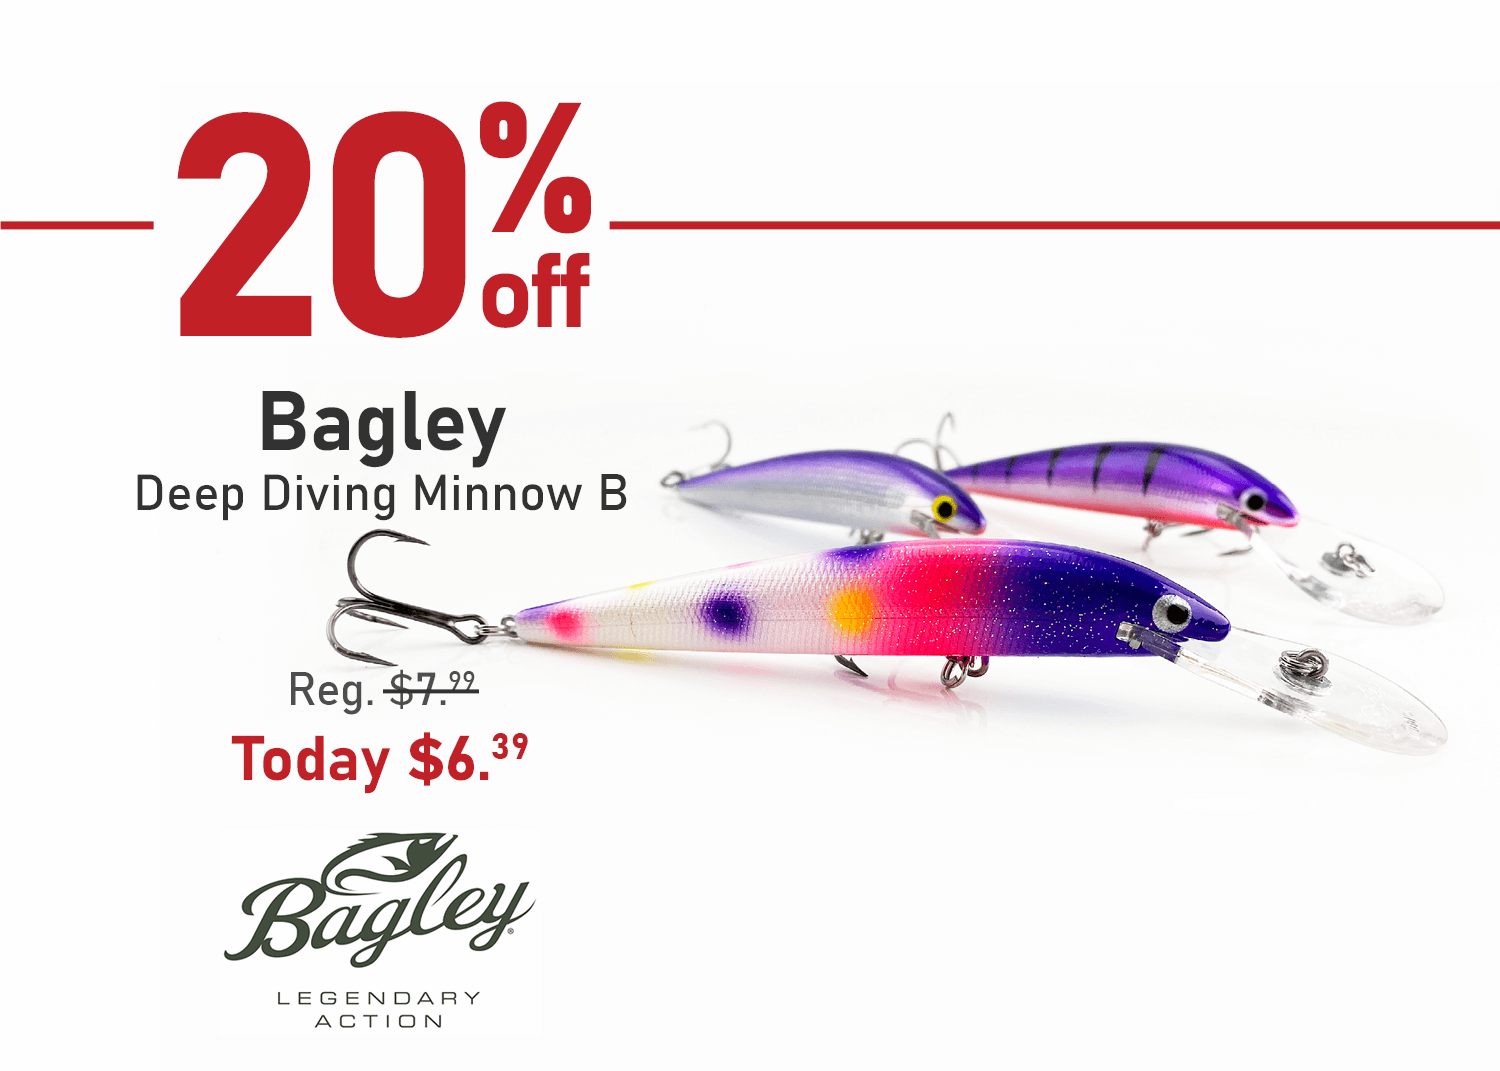 Save 20% on the Bagley Deep Diving Minnow B